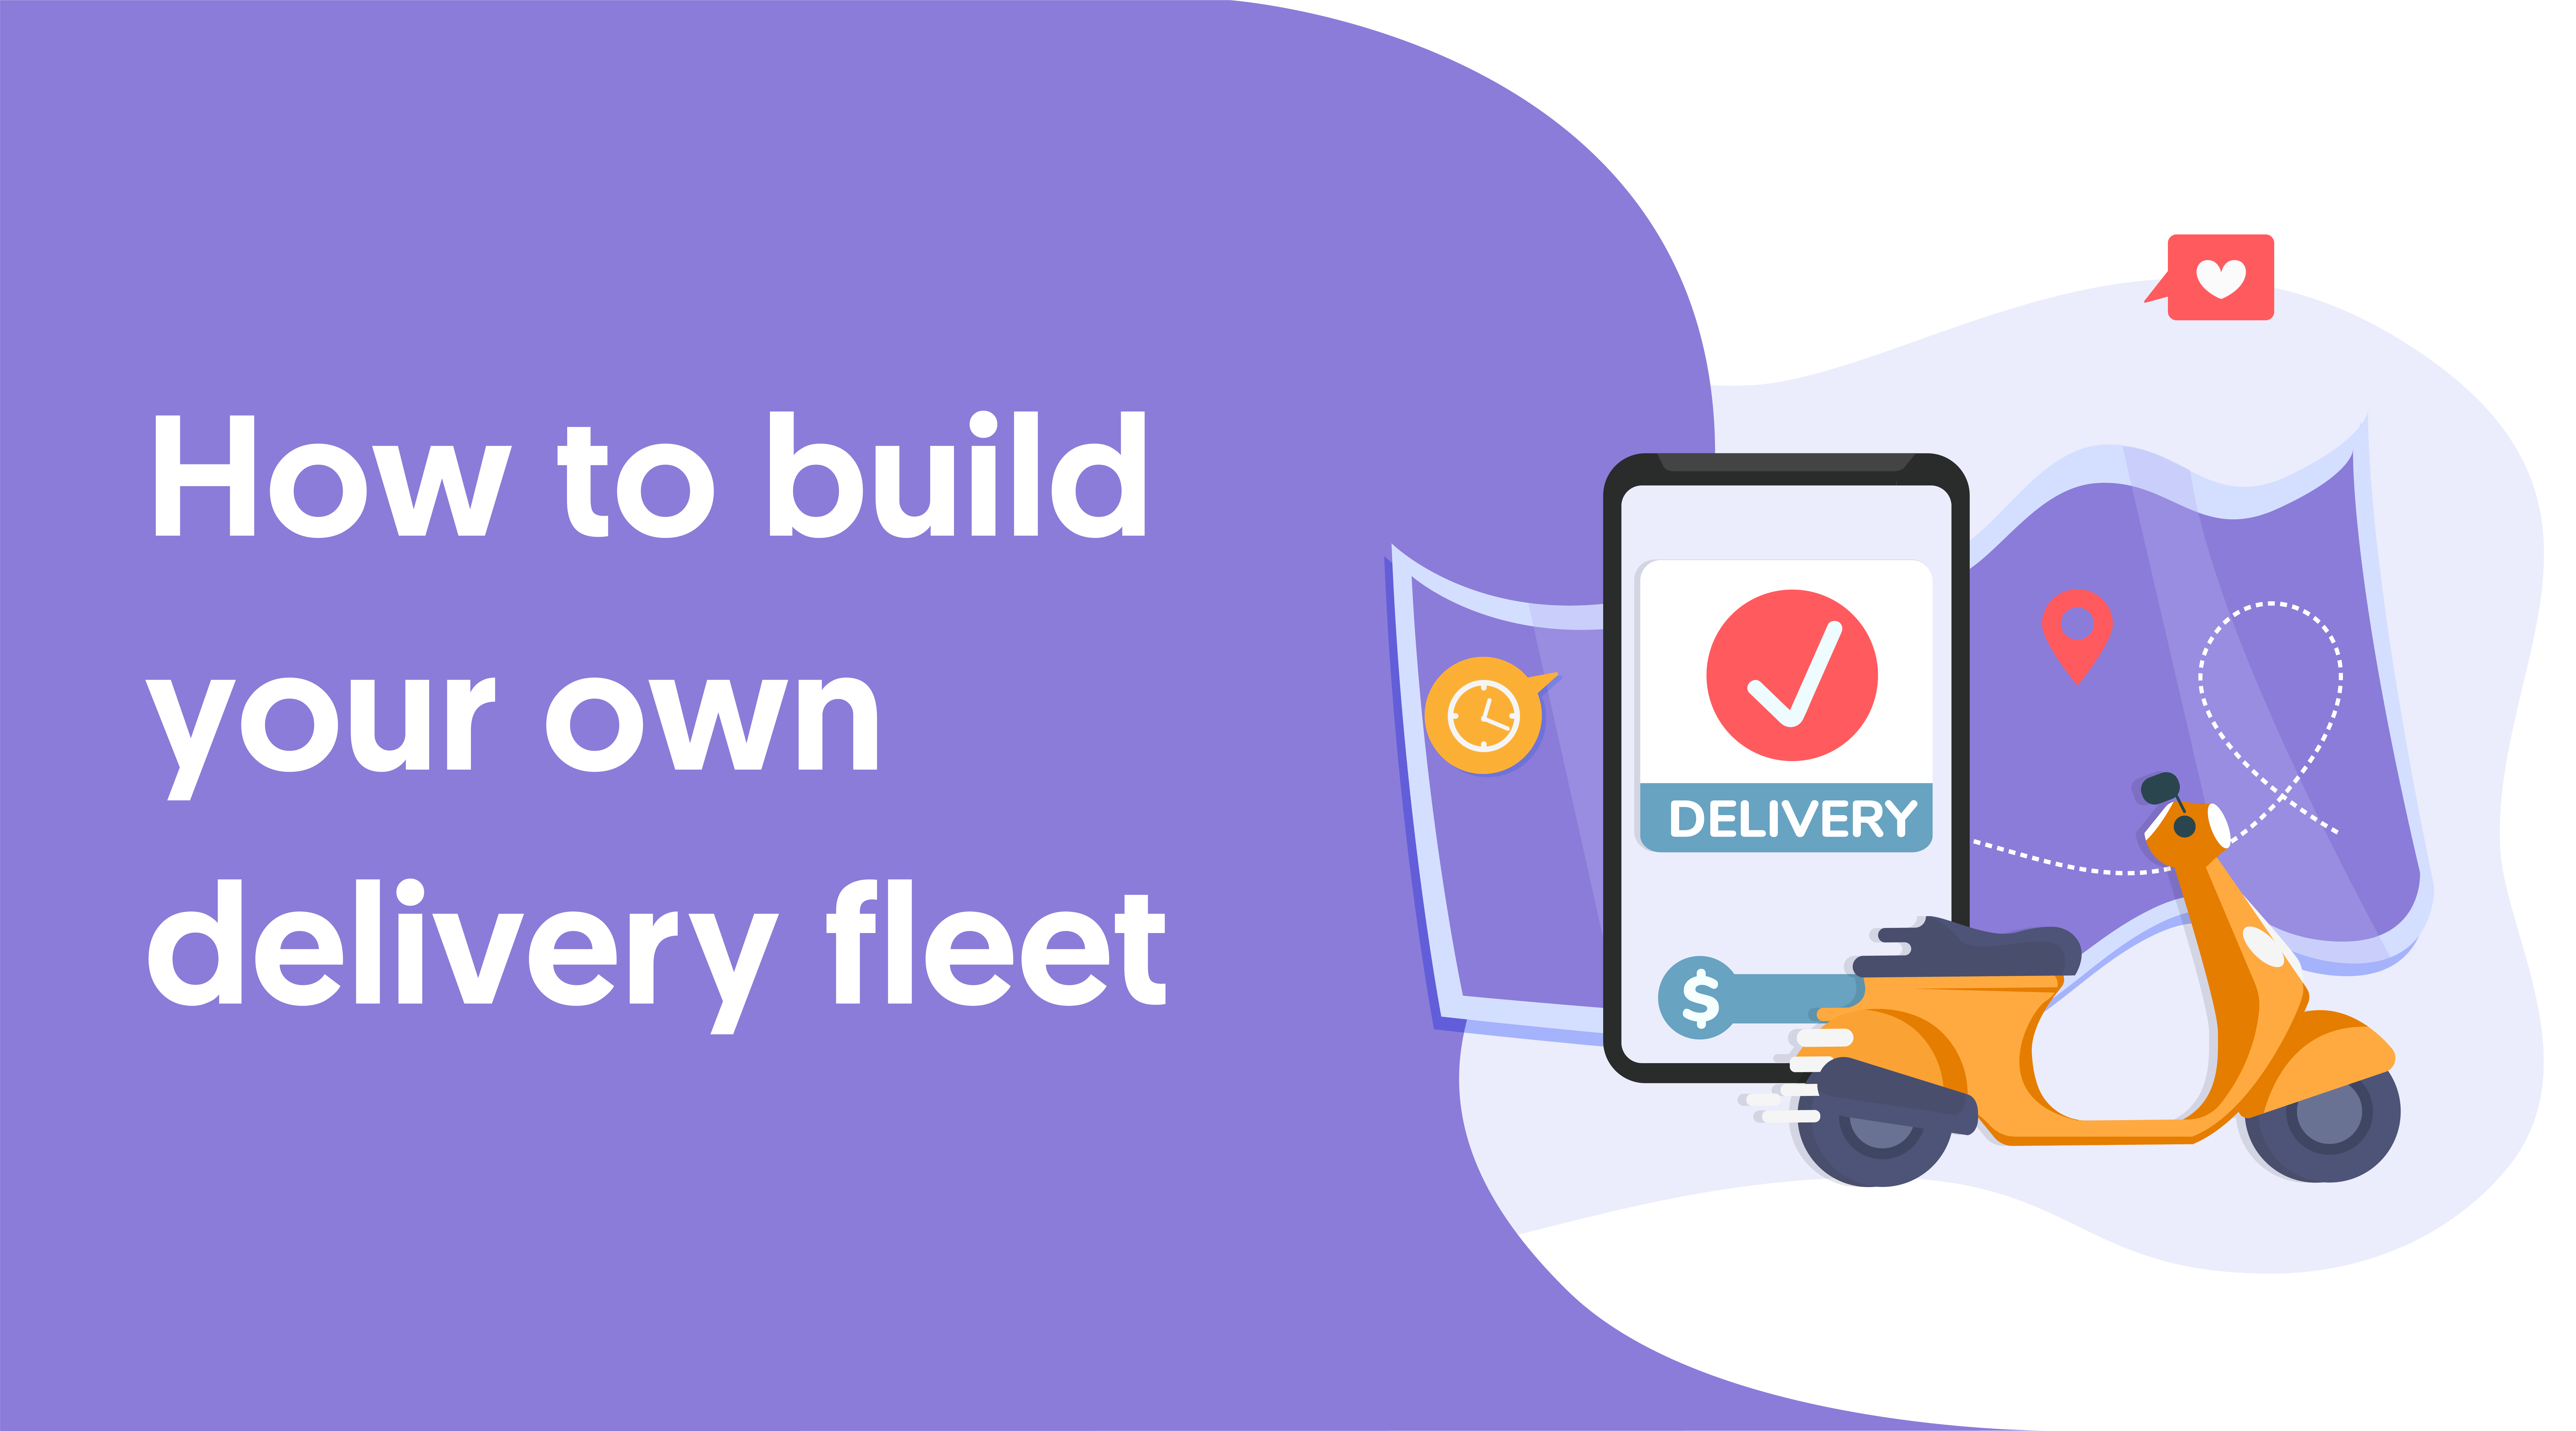 How to build your own delivery fleet